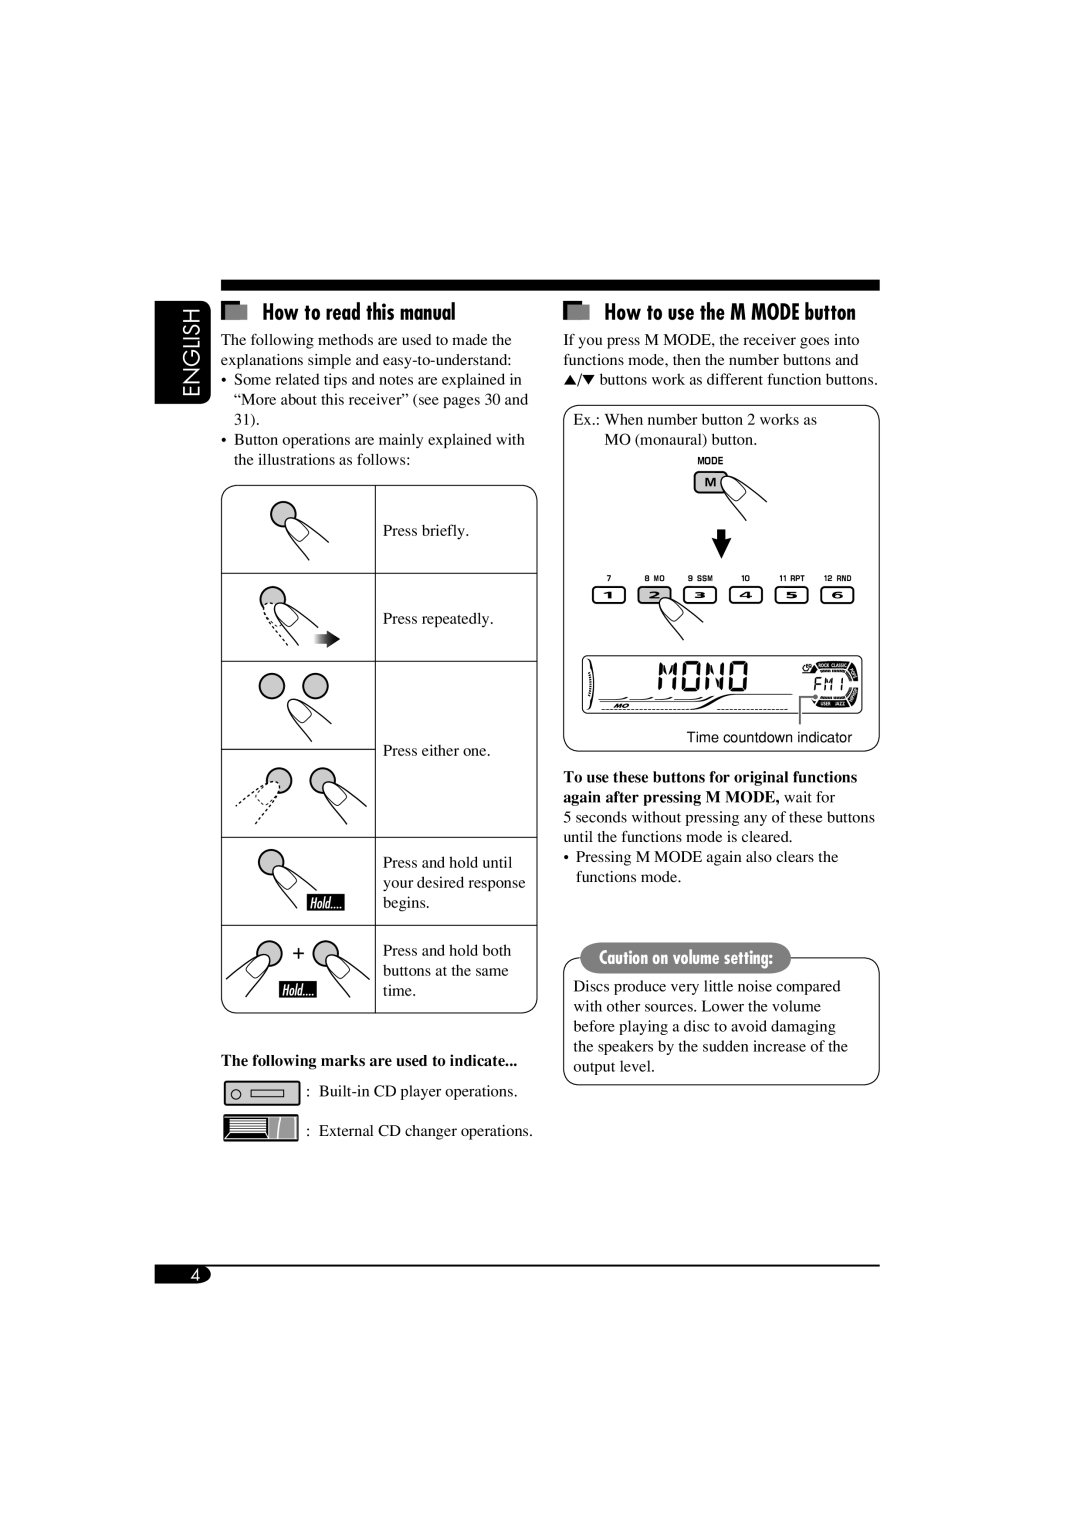 JVC KD-S51 How to read this manual, How to use the M MODE button, English, Caution on volume setting 